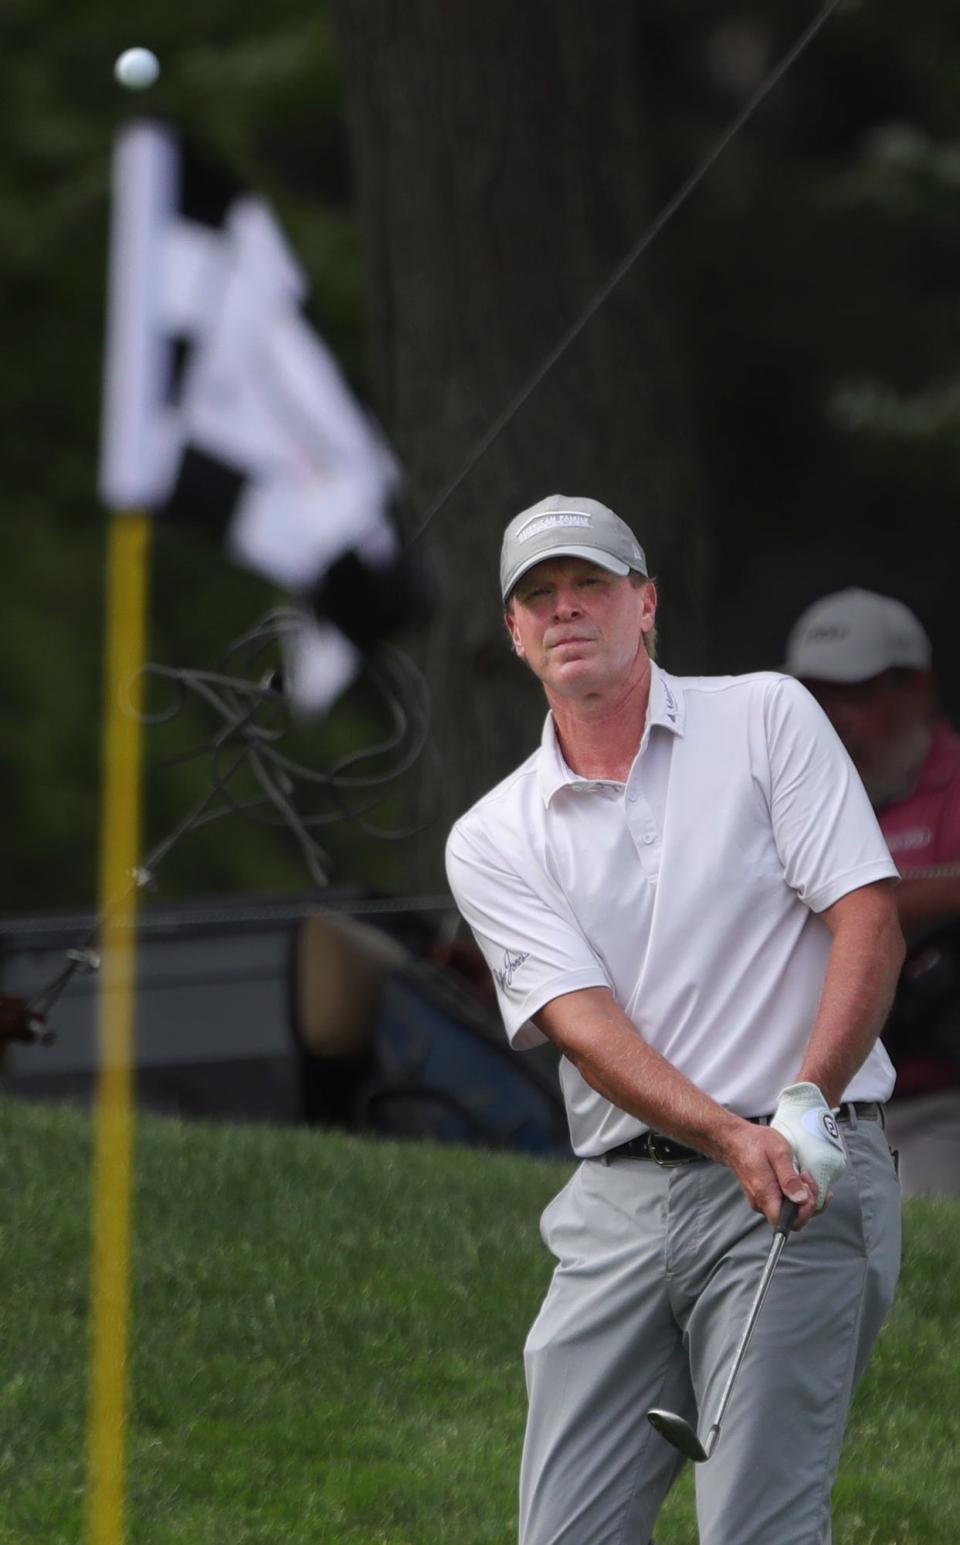 Steve Stricker watches his shot to the No. 16 pin during the third round of the Bridgestone Senior Players Championship at Firestone Country Club on Saturday, June 26, 2021, in Akron, Ohio.